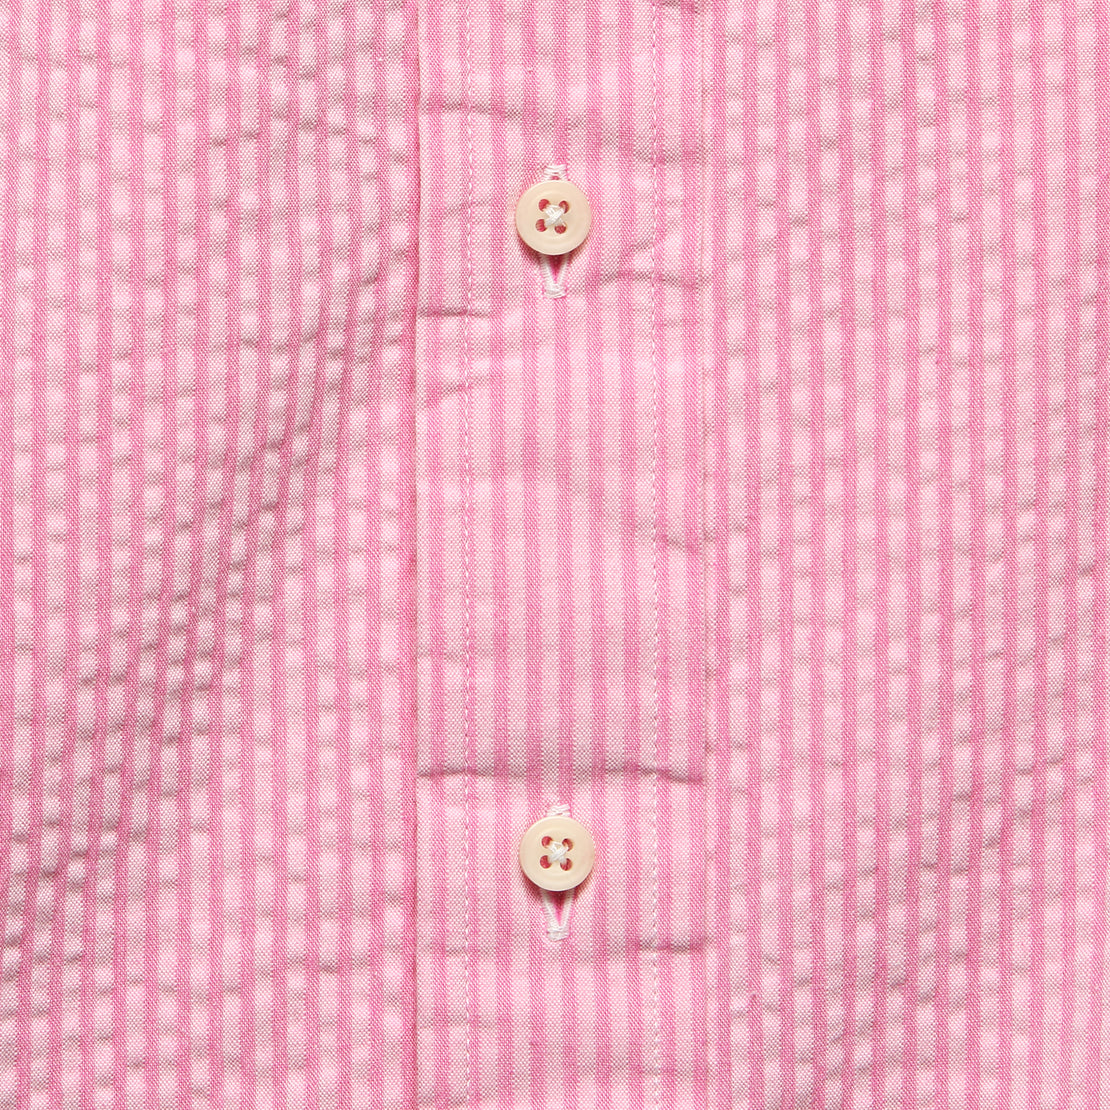 Tonal Seersucker Shirt - Pink - Gitman Vintage - STAG Provisions - Tops - S/S Woven - Other Pattern